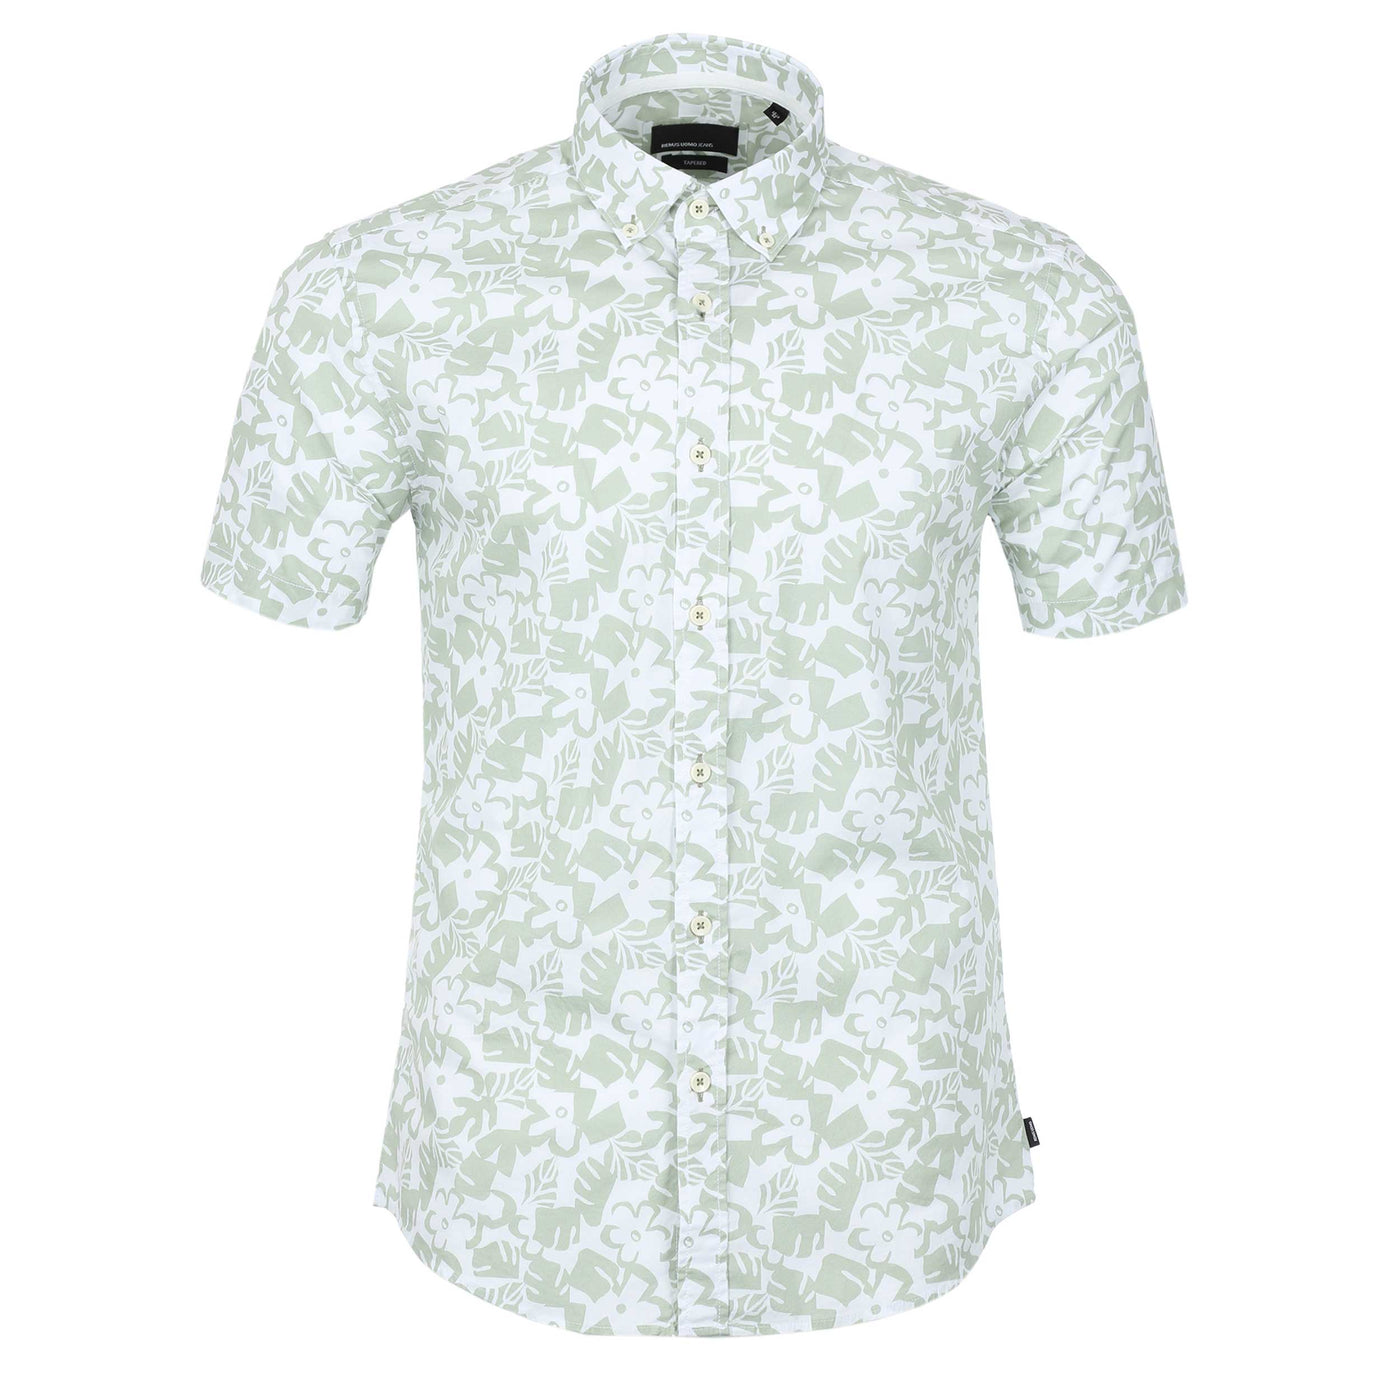 Remus Uomo Leaf Floral Print Short Sleeve Shirt in Mint White